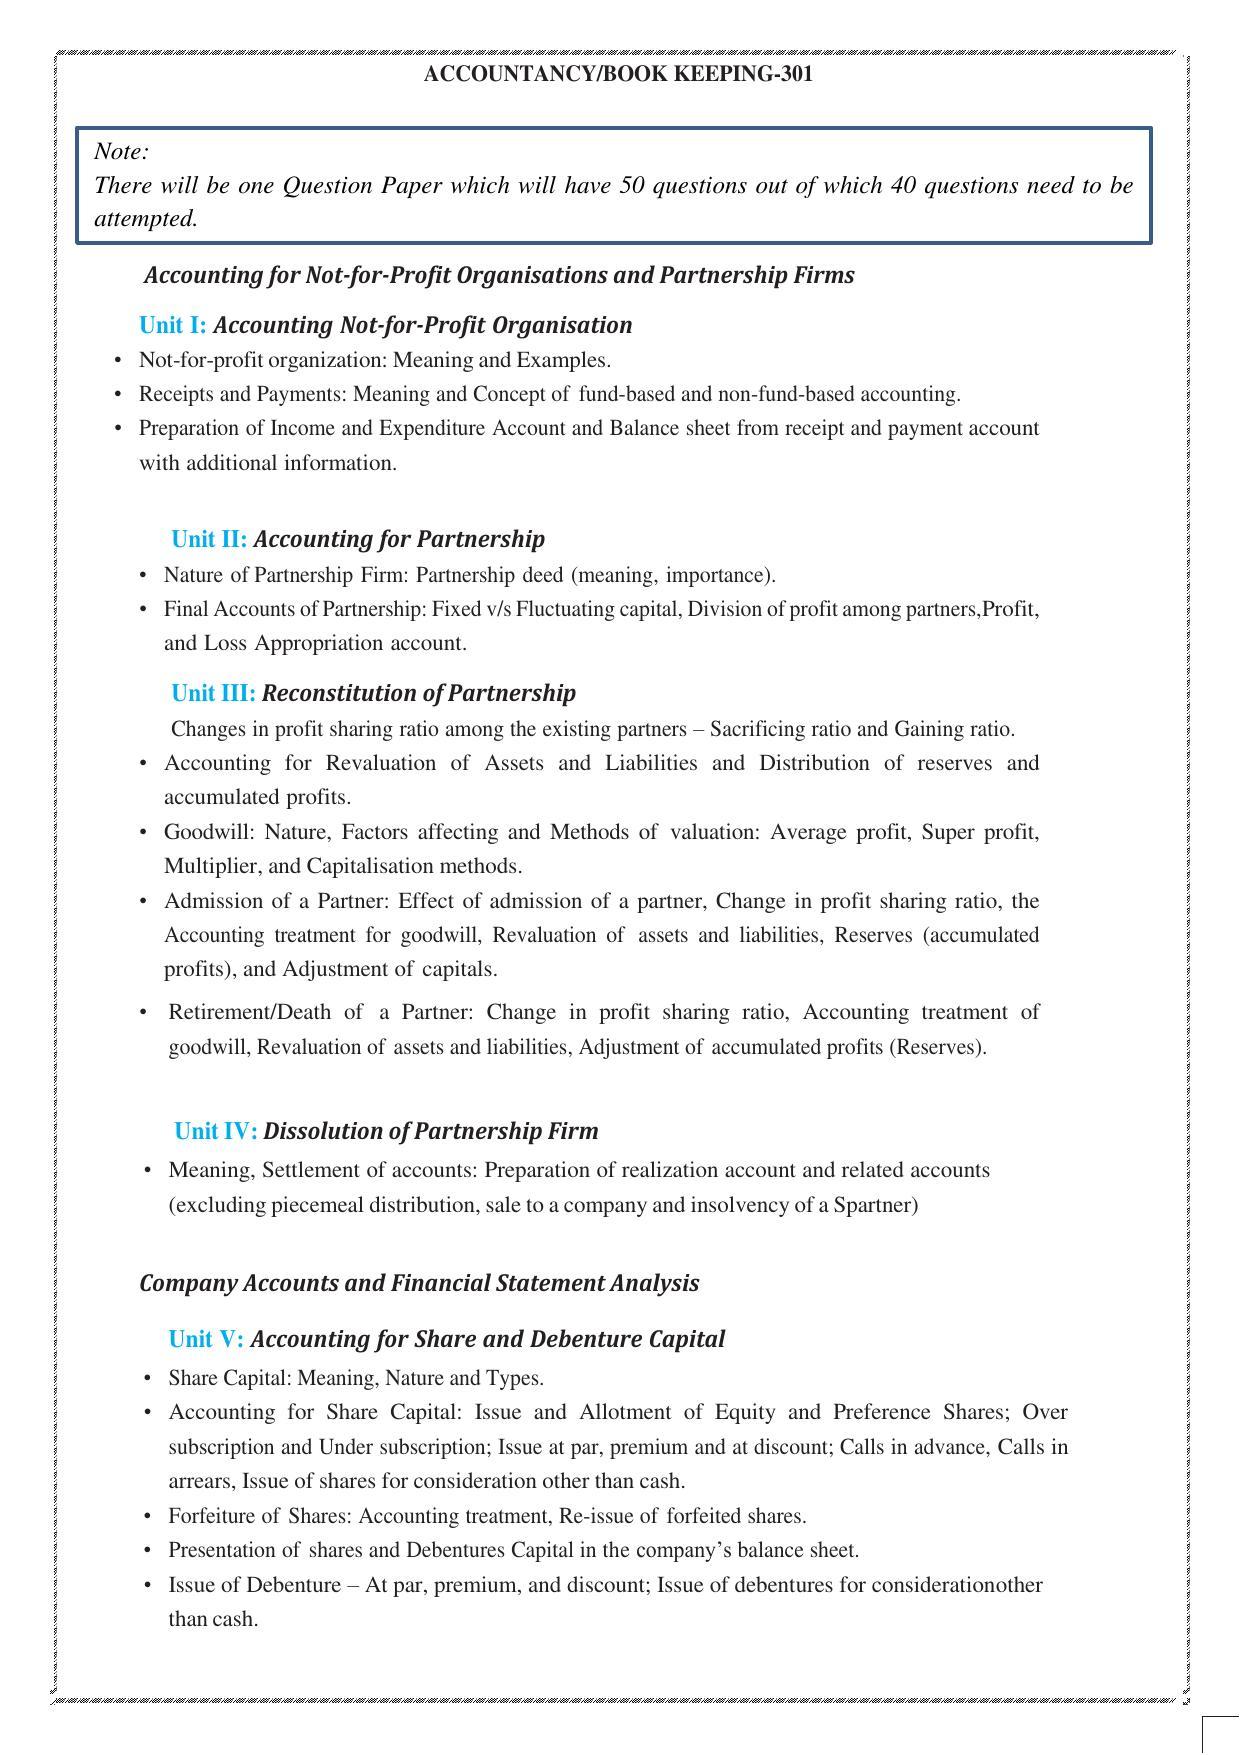 CUET Syllabus for Accountancy (English) - Page 2